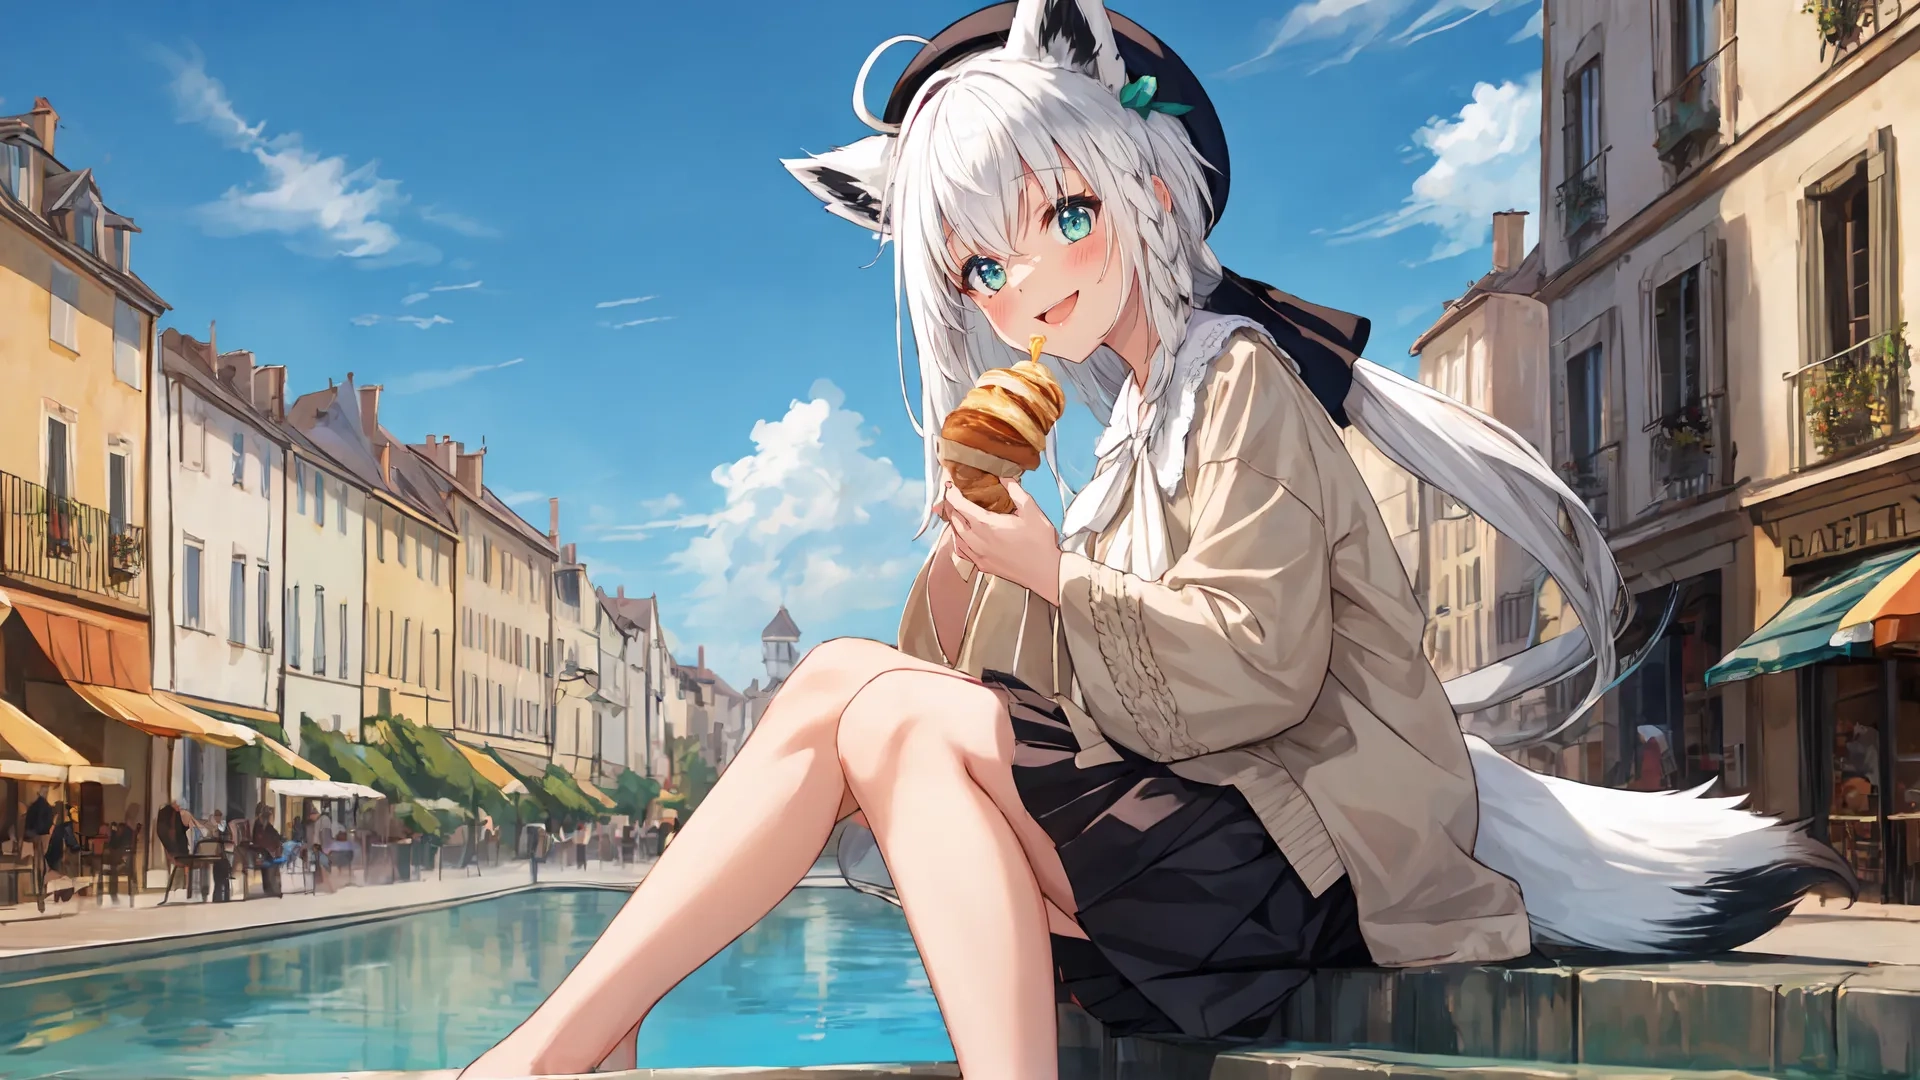 a pretty anime lady is eating an ice cream cone while sitting by the waters edge outside an alleyway outside buildings and walking shops there
